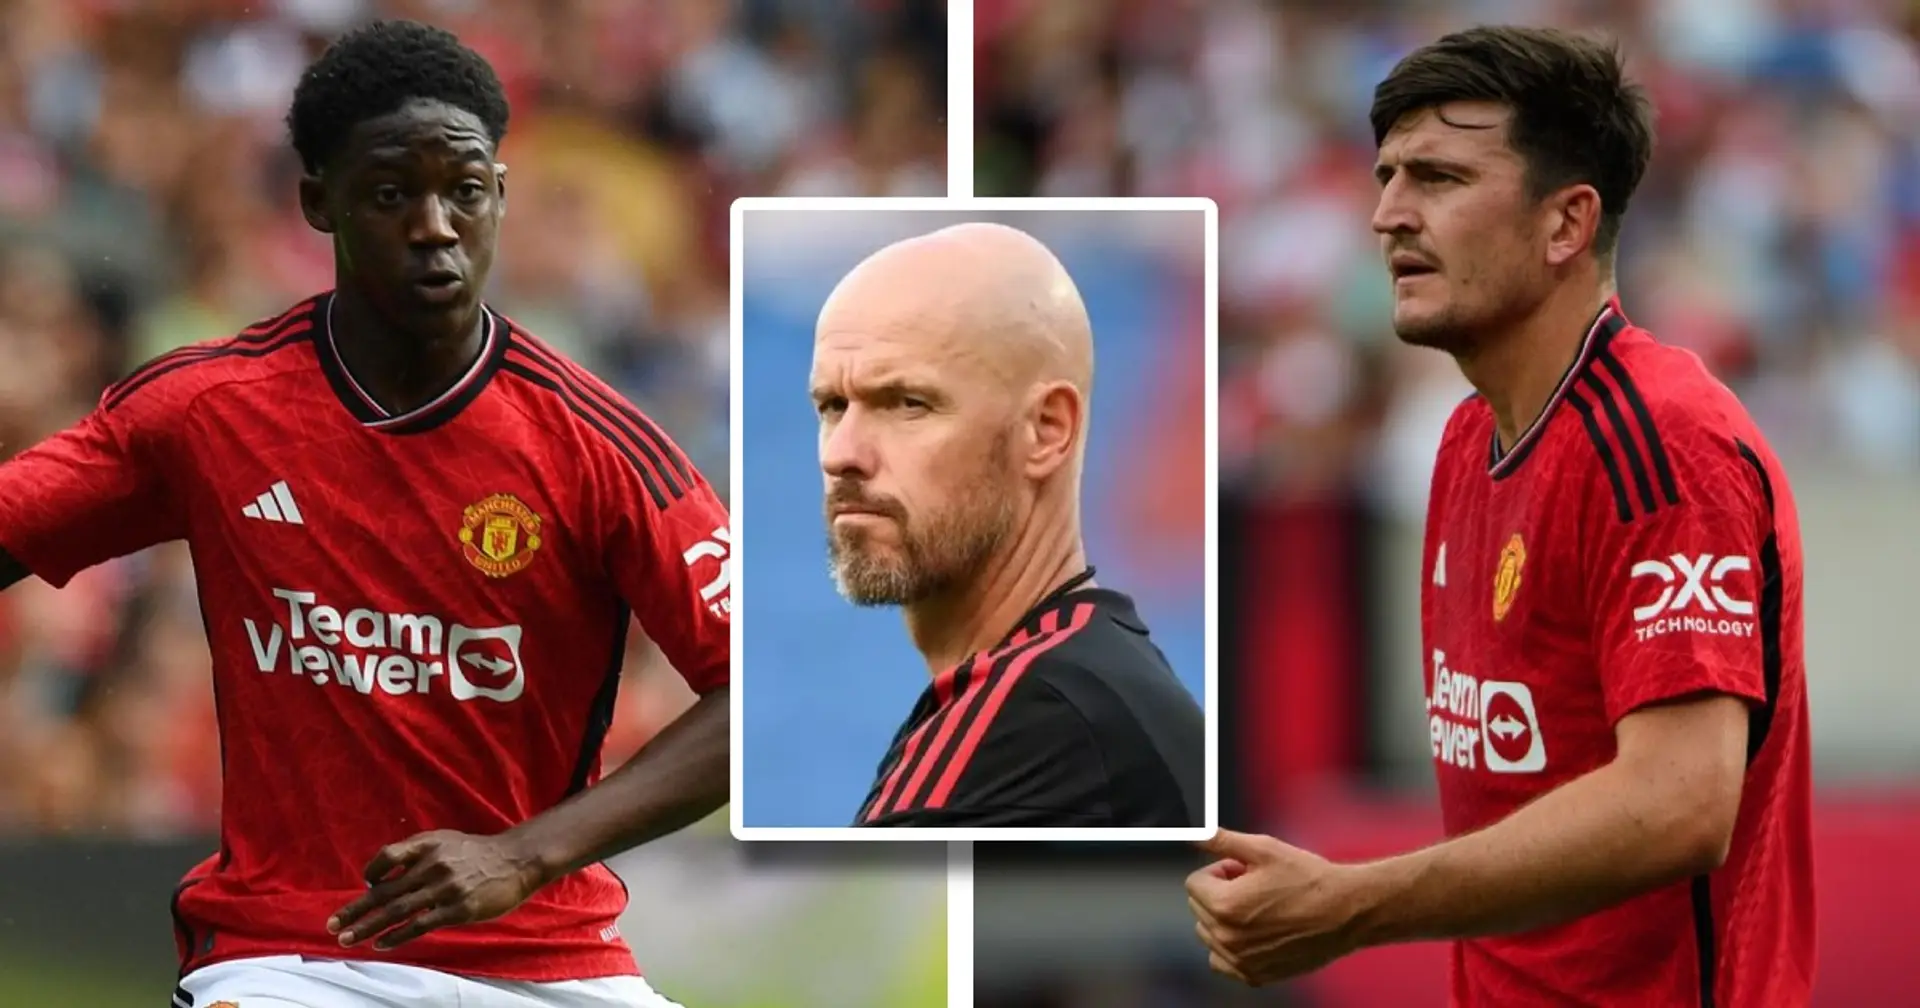 5 players who have impressed Ten Hag in pre-season, 3 who haven't